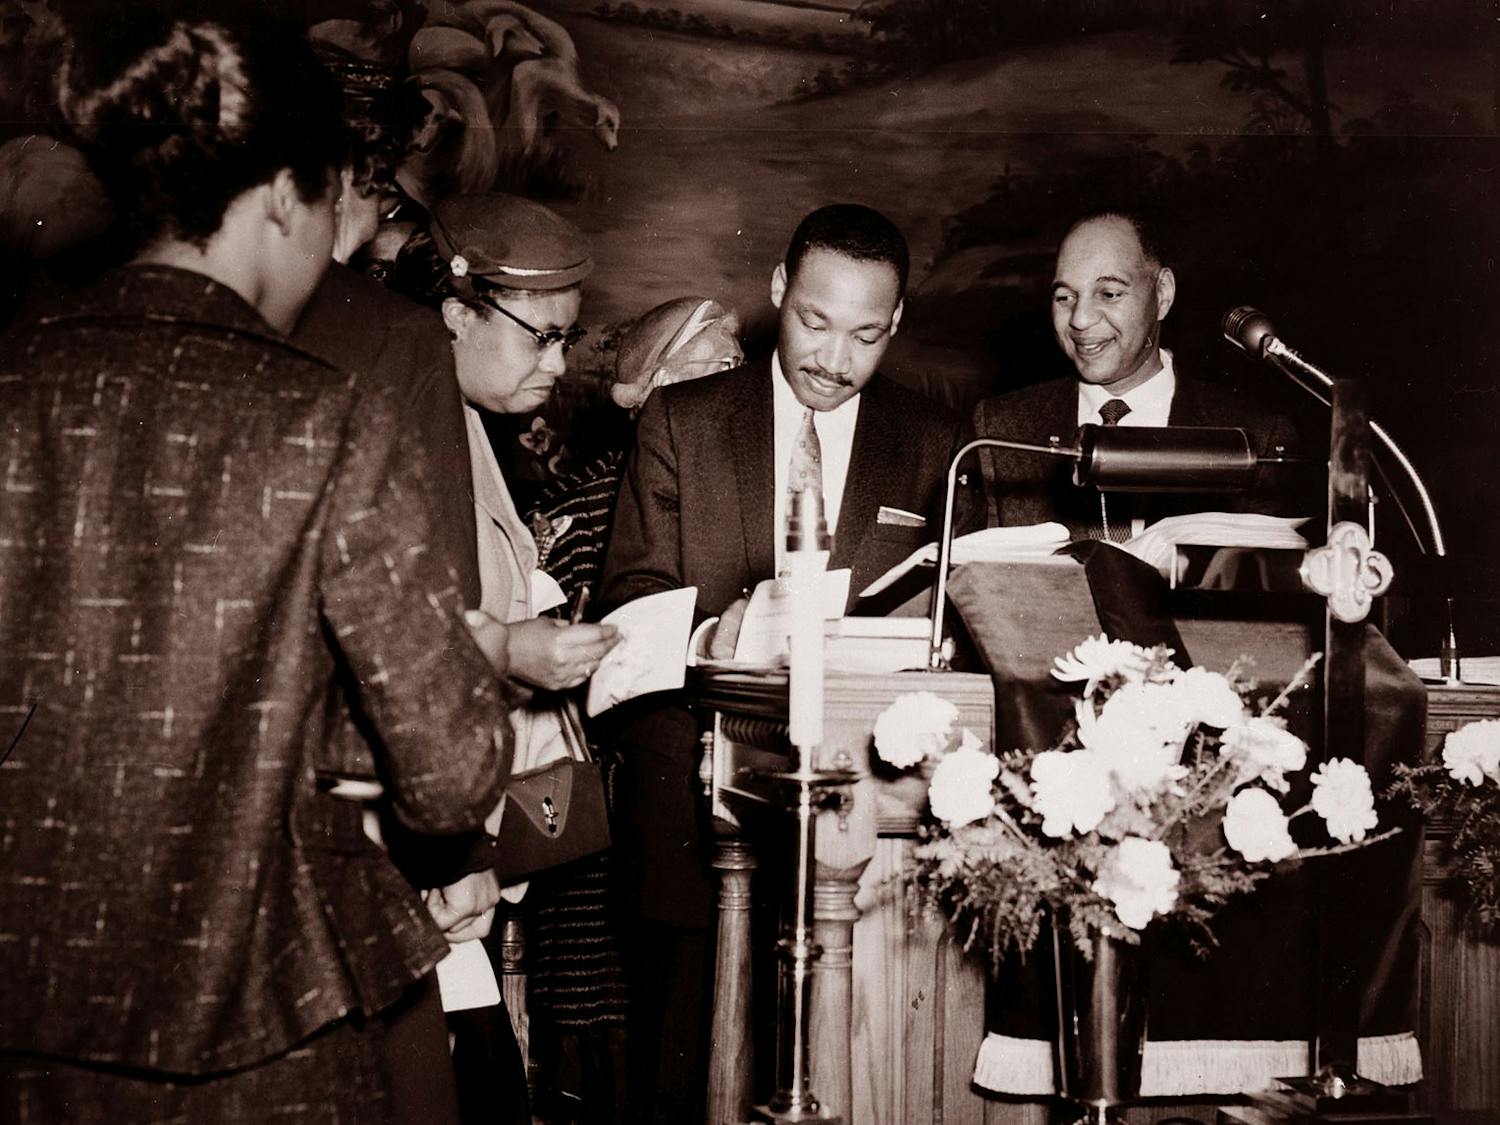 Martin Luther King Jr. in Durham in 1958. Photo from the General Negative Collection, State Archives of North Carolina.